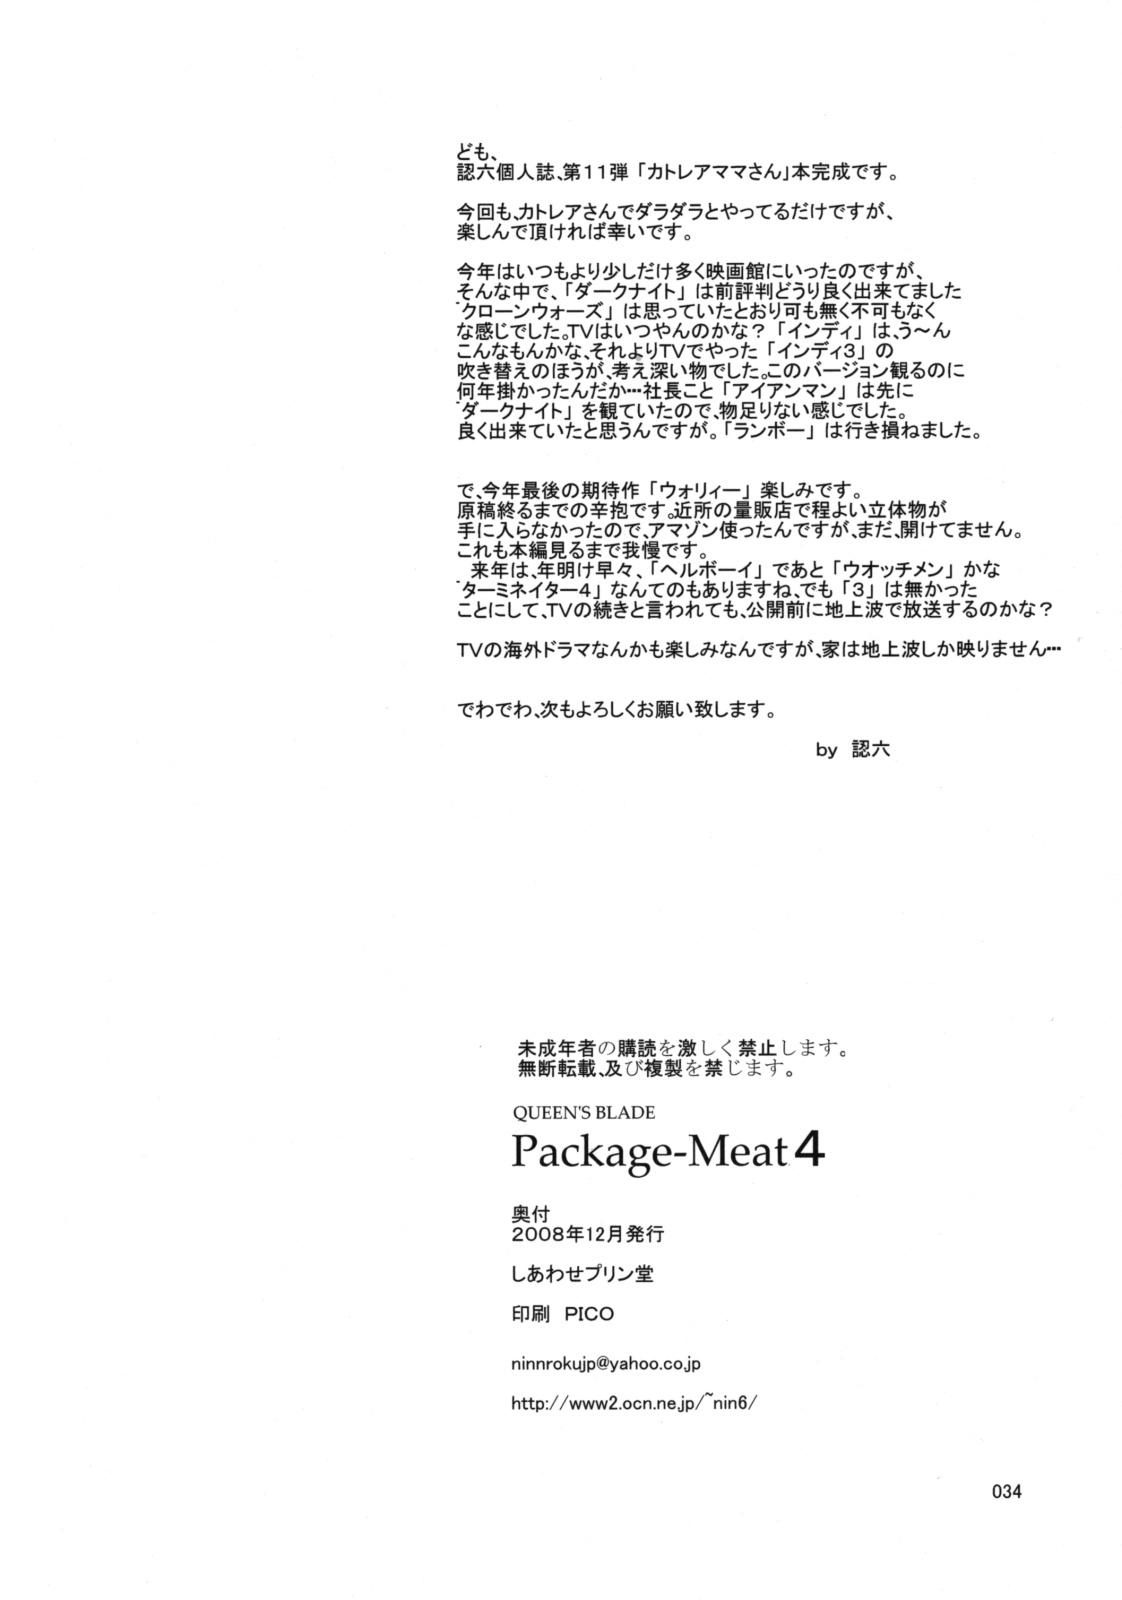 Package-Meat 4 32